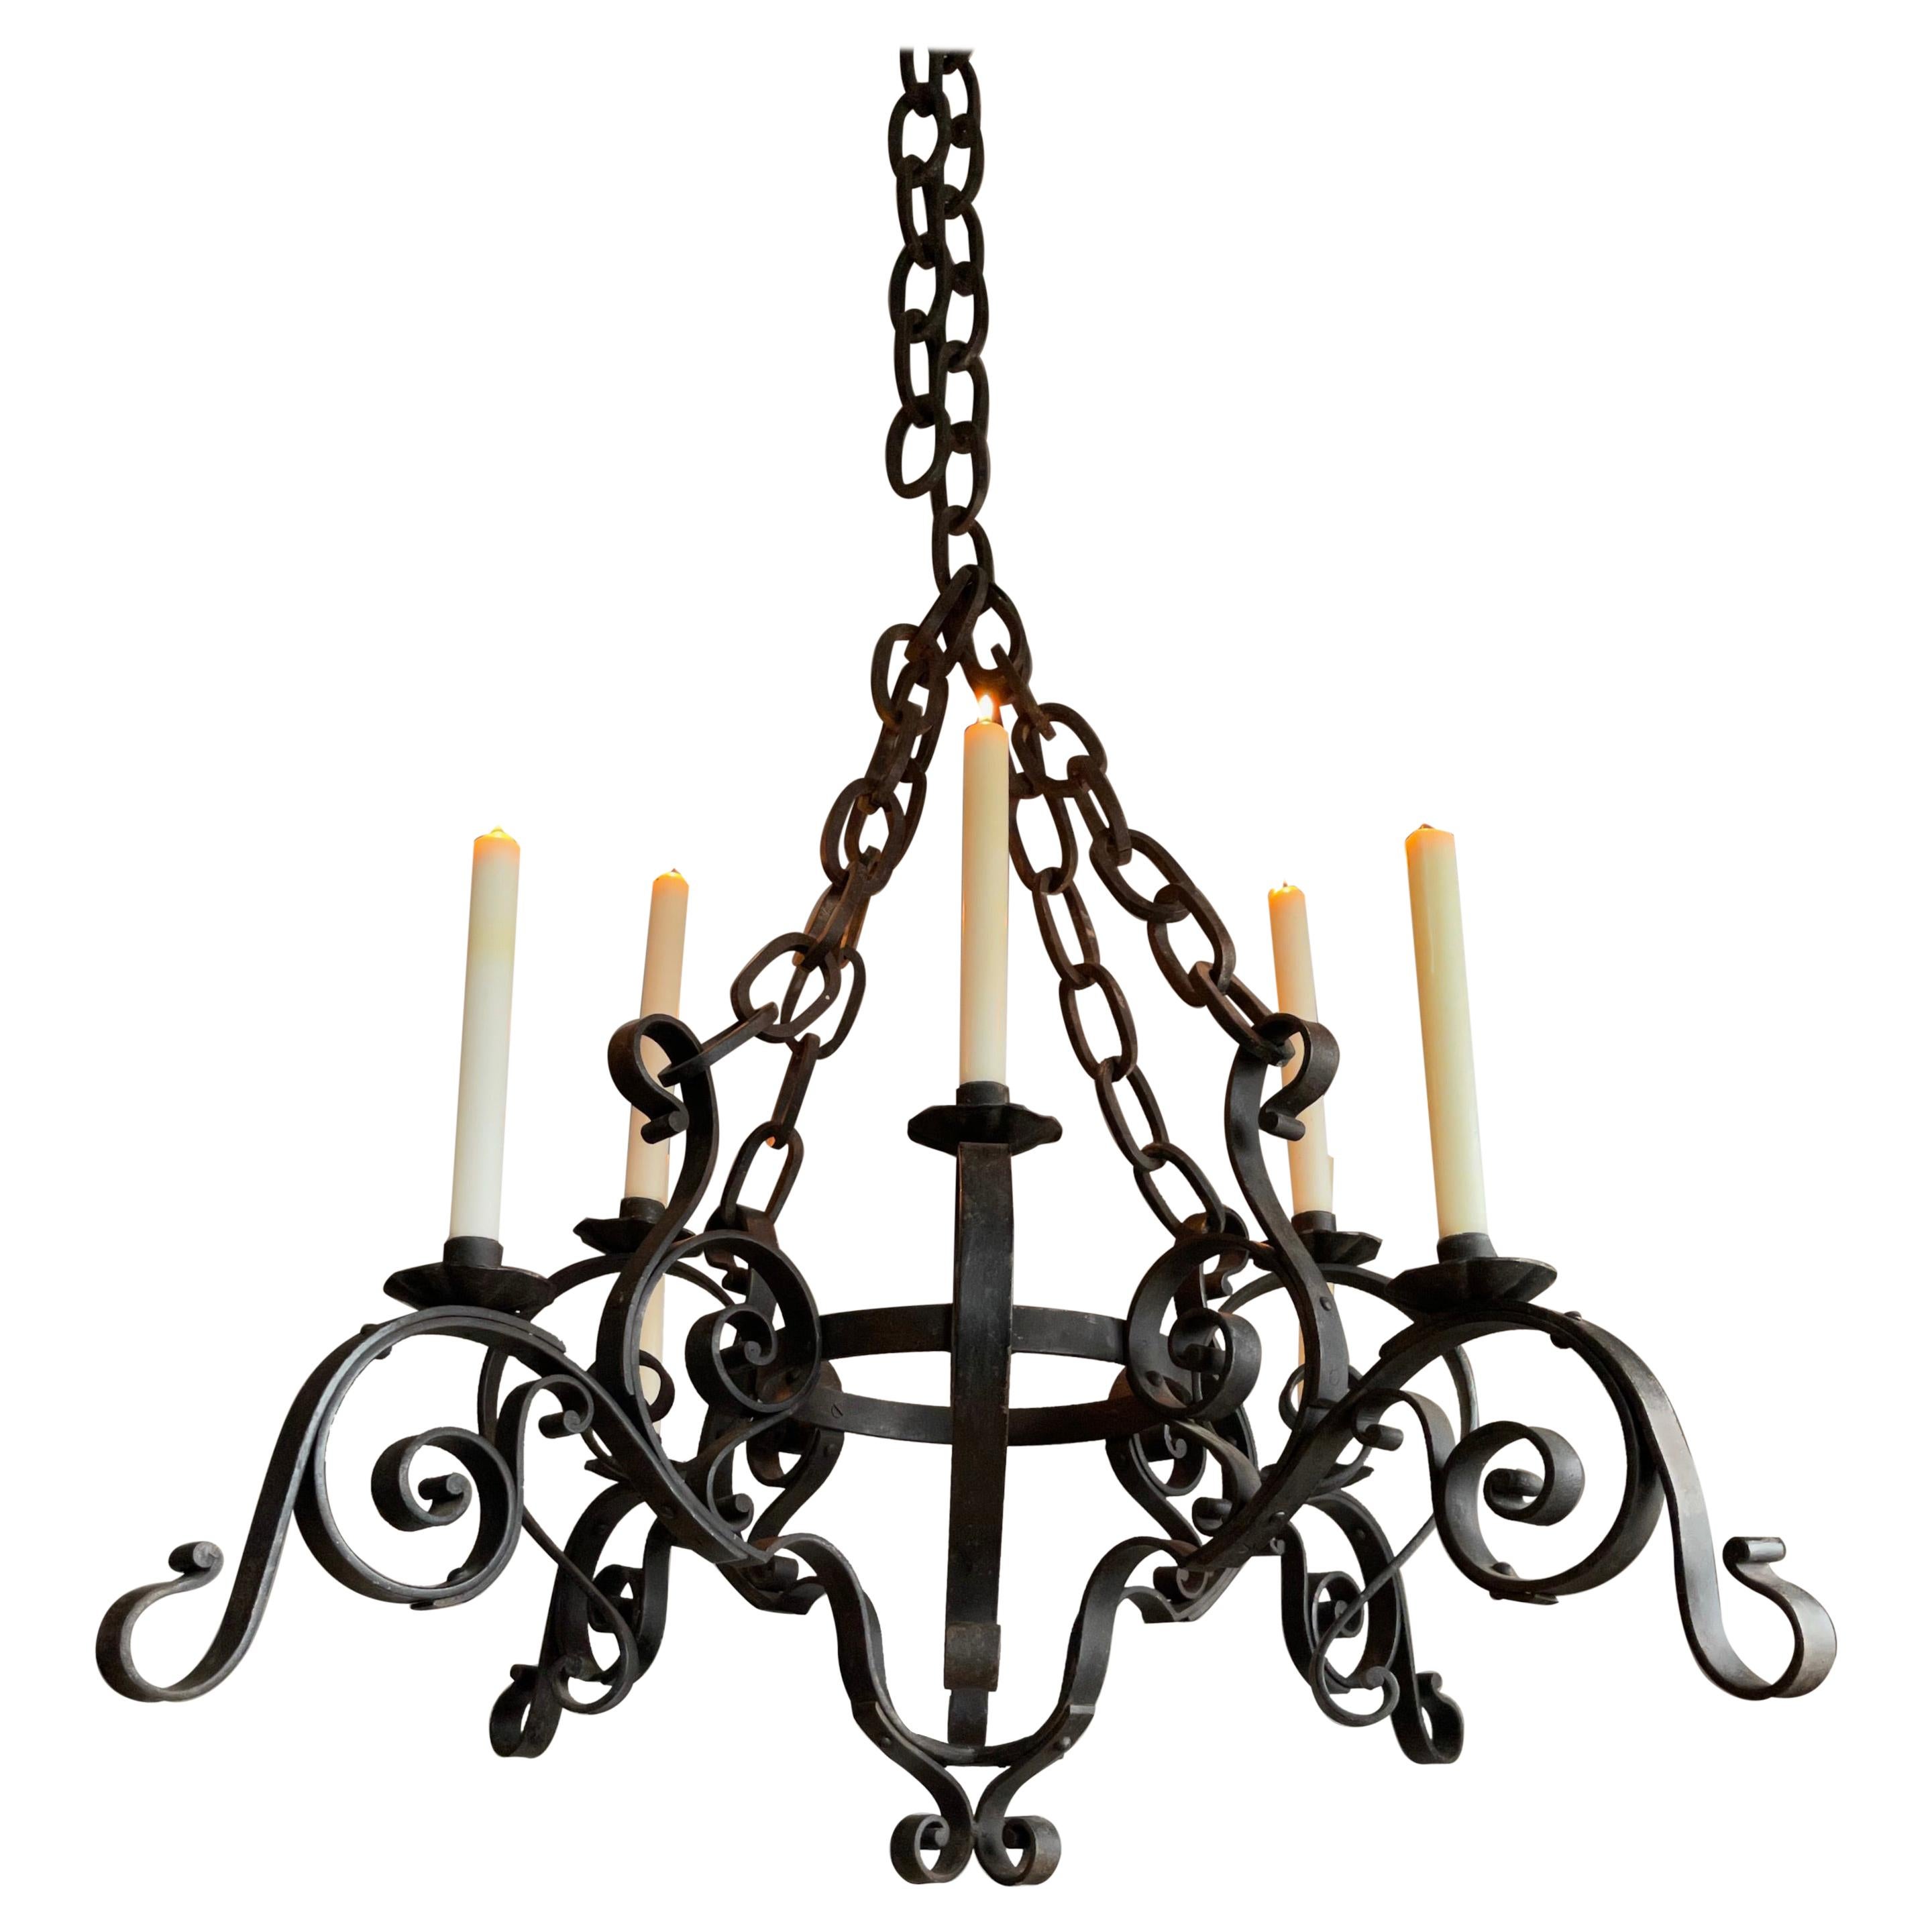 Large Hand Forged Wrought Iron Candle Chandelier for Dining Room, Restaurant Etc